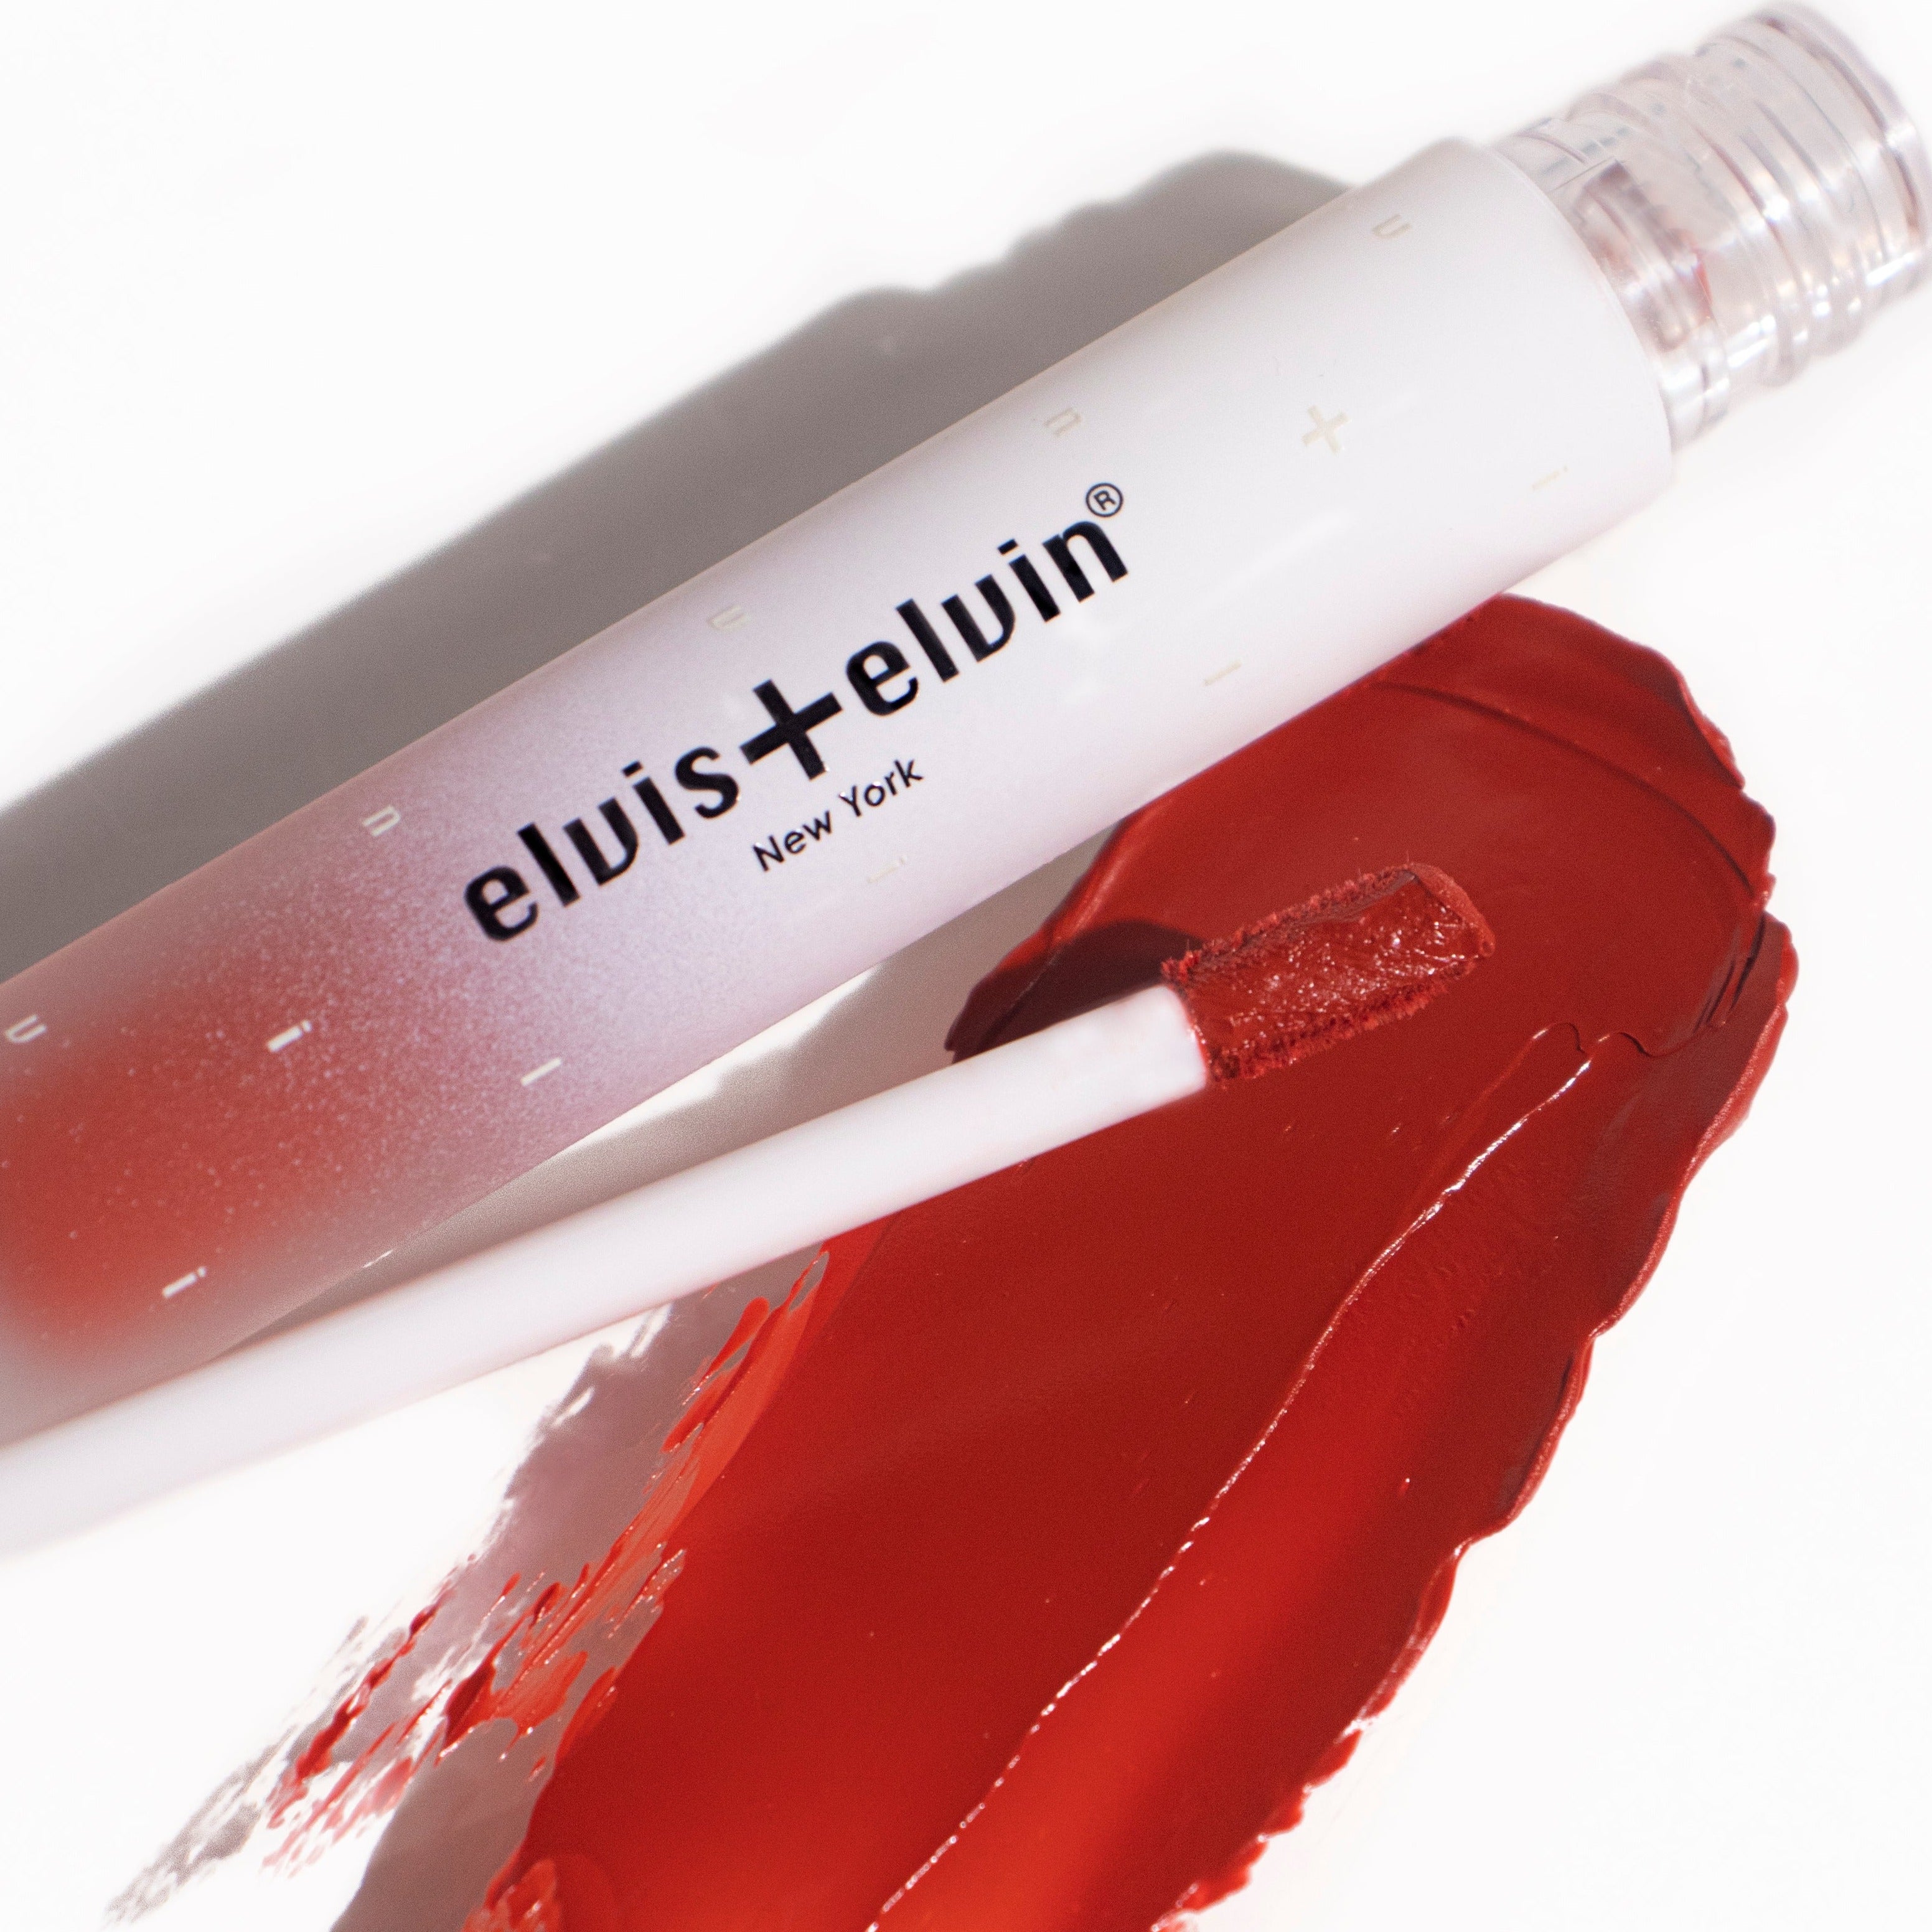 Floral Liquid Lipstick with Hyaluronic Acid